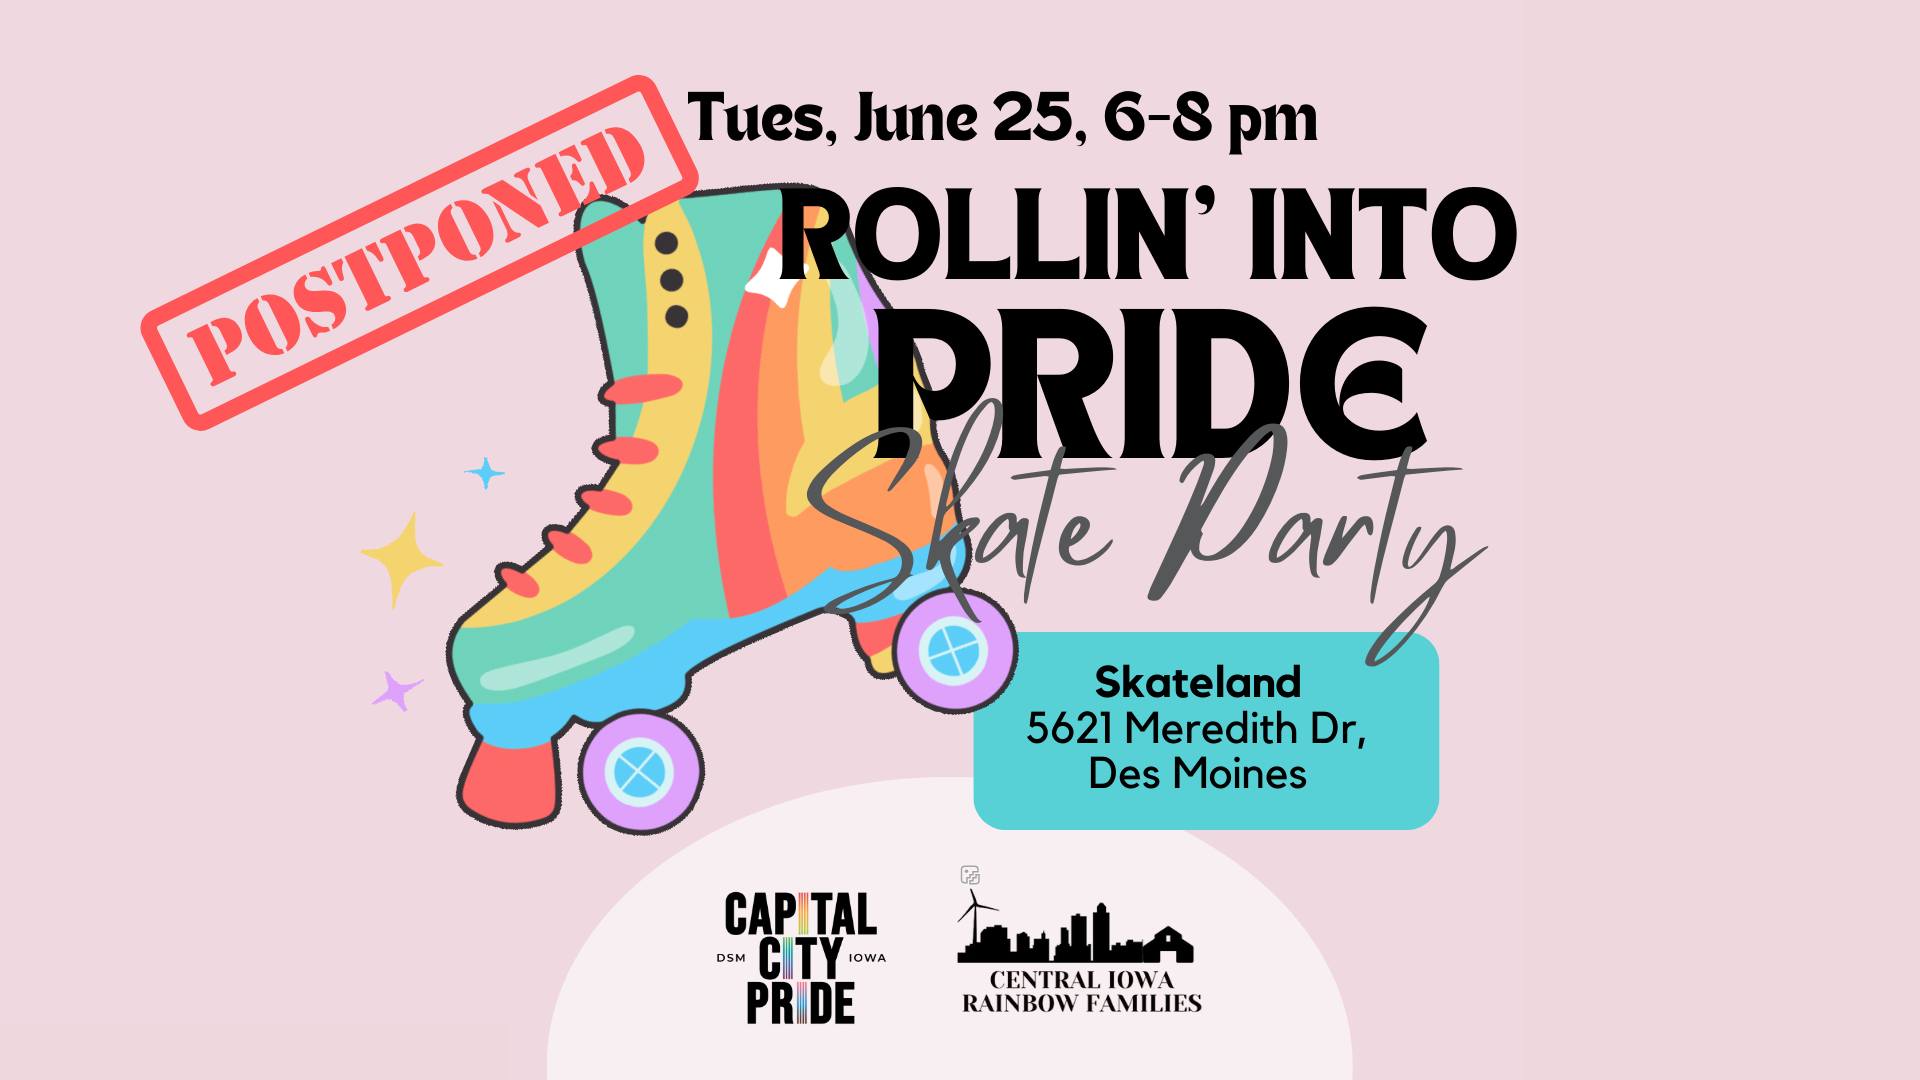 Rolling Into Pride Skate Party Image